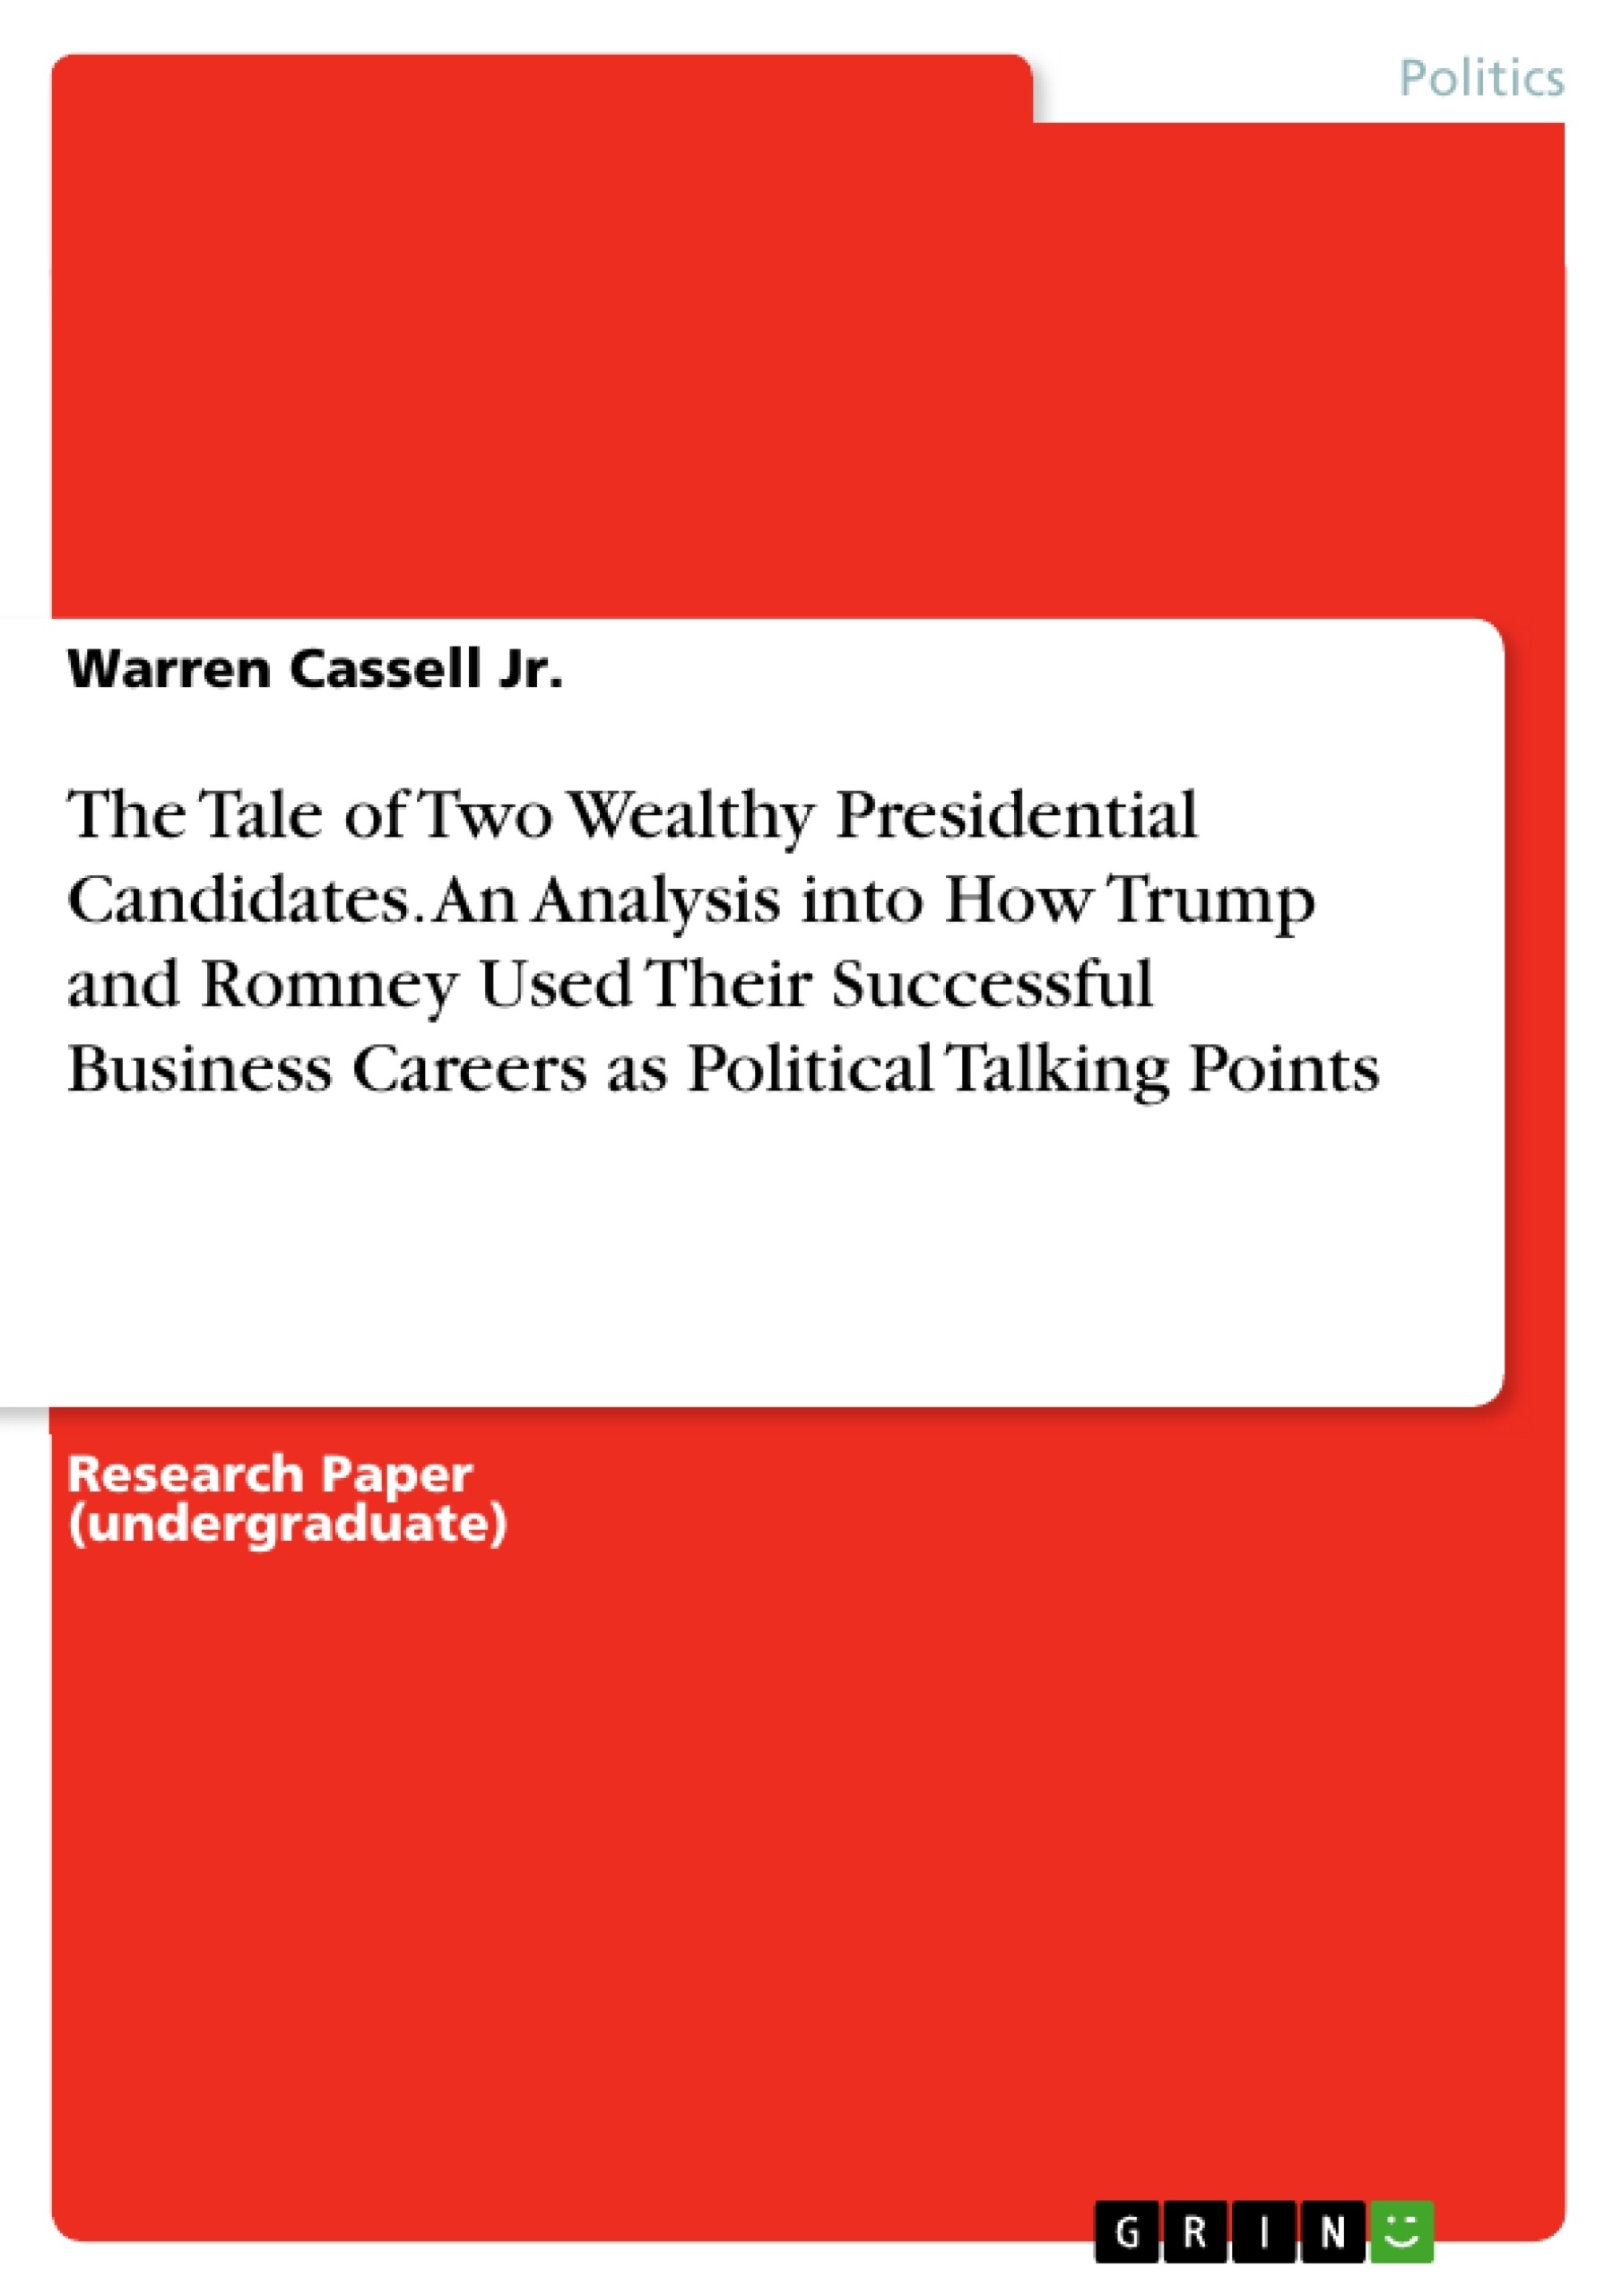 Título: The Tale of Two Wealthy Presidential Candidates. An Analysis into How Trump and Romney Used Their Successful Business Careers as Political Talking Points